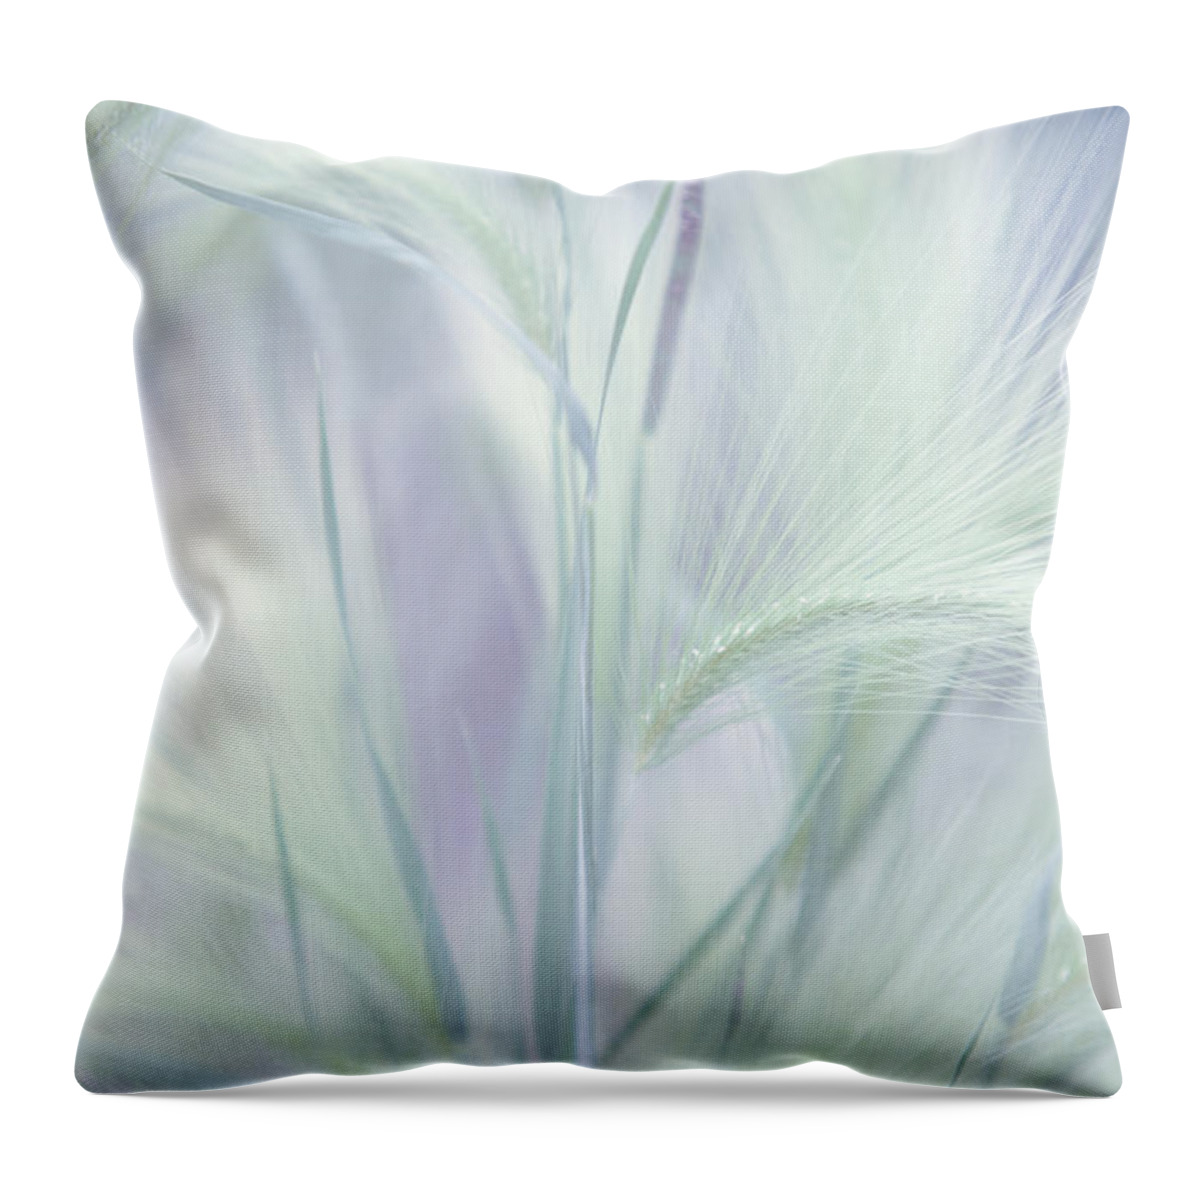 Grass Throw Pillow featuring the photograph Whisper in the Moon Light. Grass Pastels by Jenny Rainbow